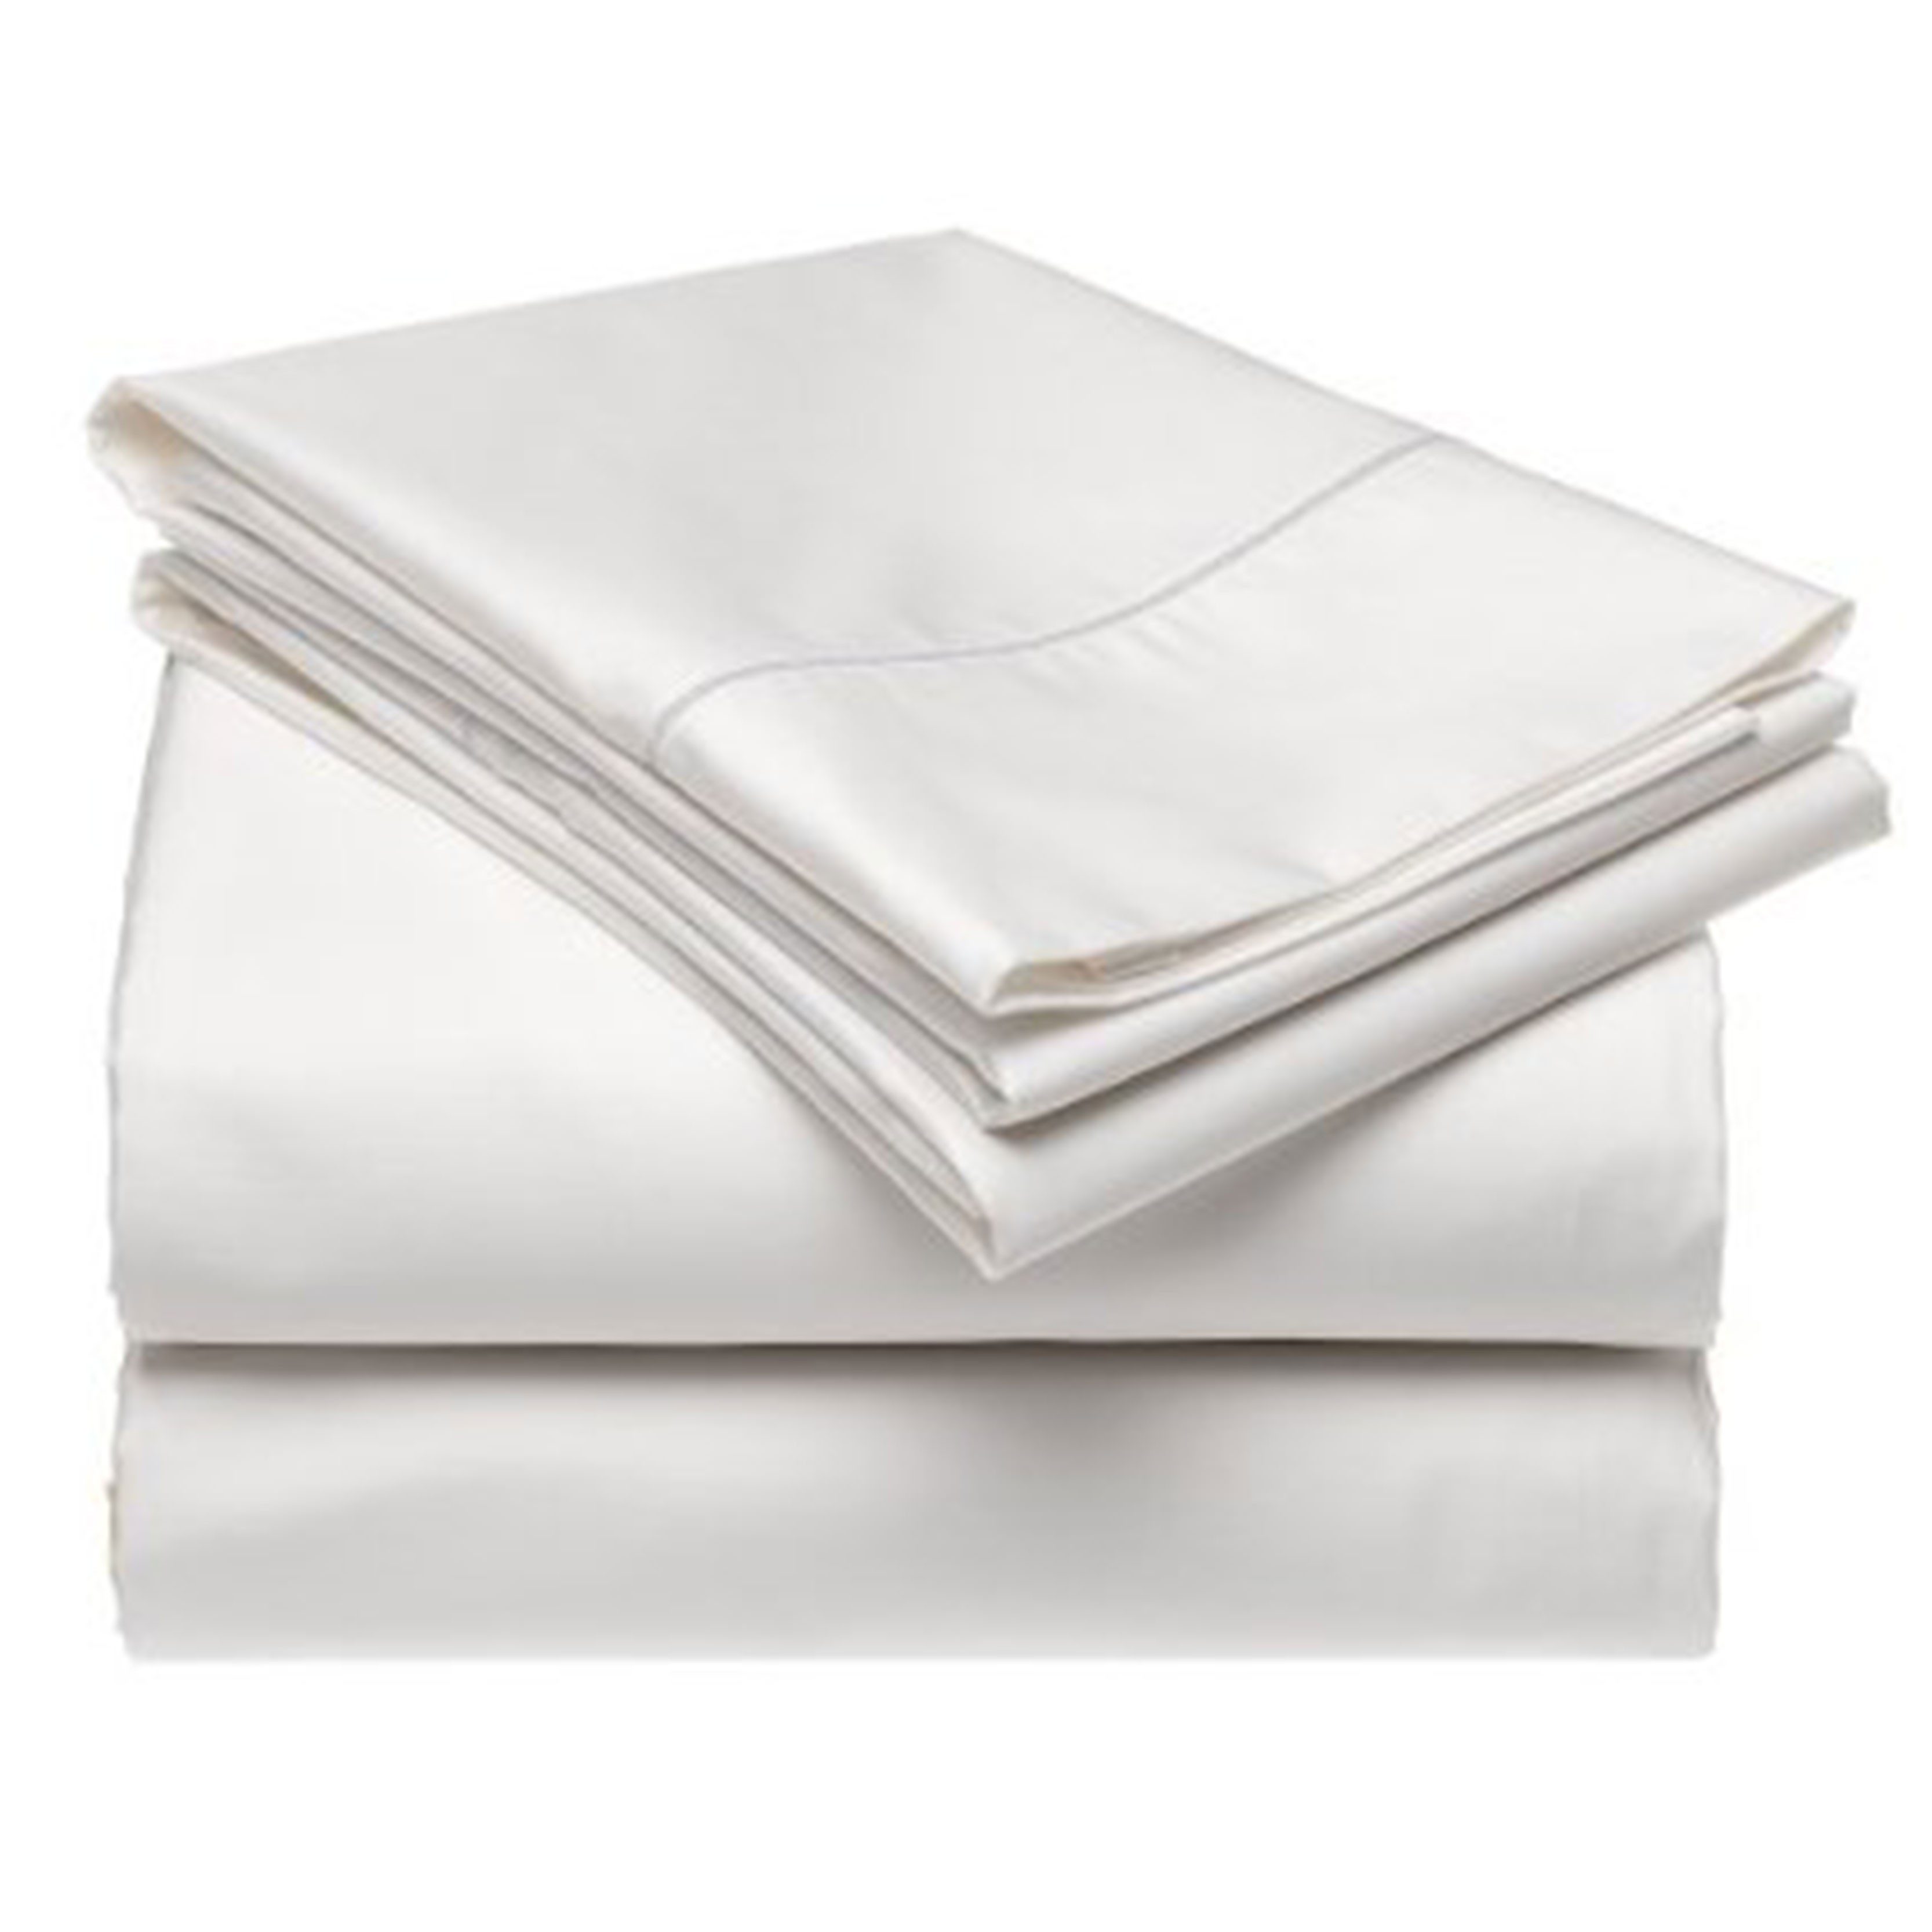 200 Thread Count Belledorm Brushed Cotton Flat Sheet White, Double Housewife Pillowcase Bundle Set